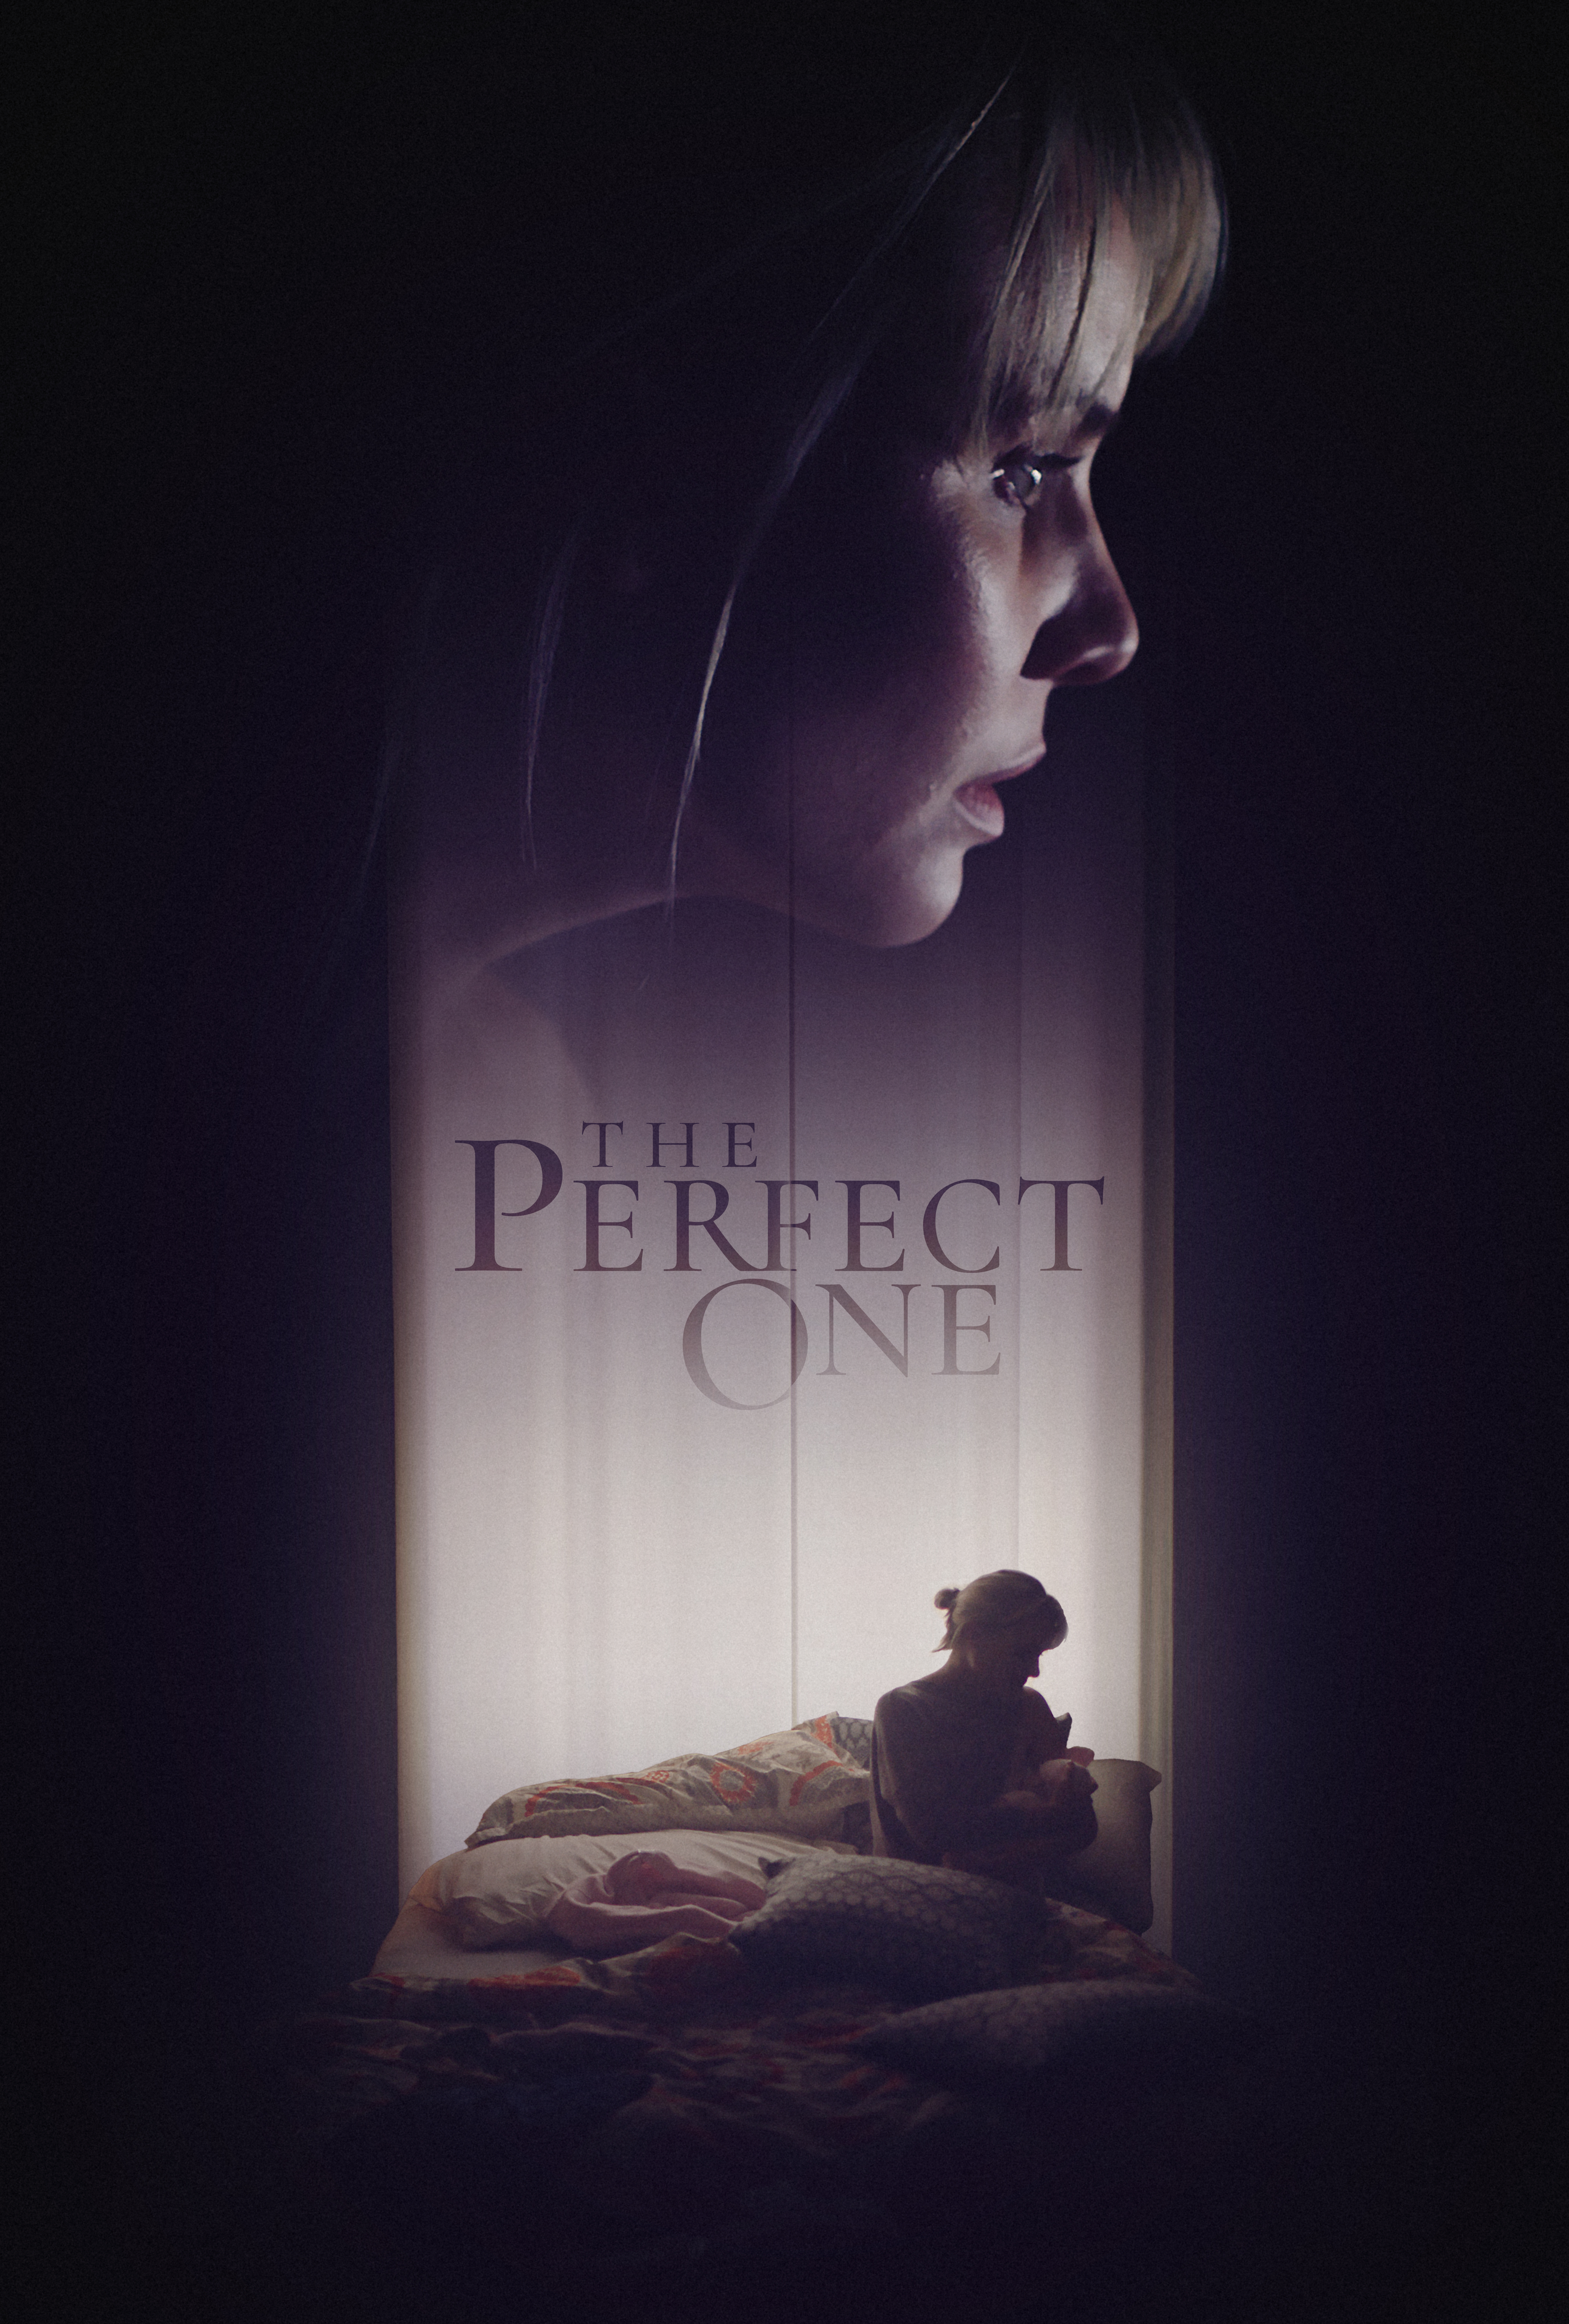 The Perfect One (2018) starring Helena Mattsson on DVD on DVD